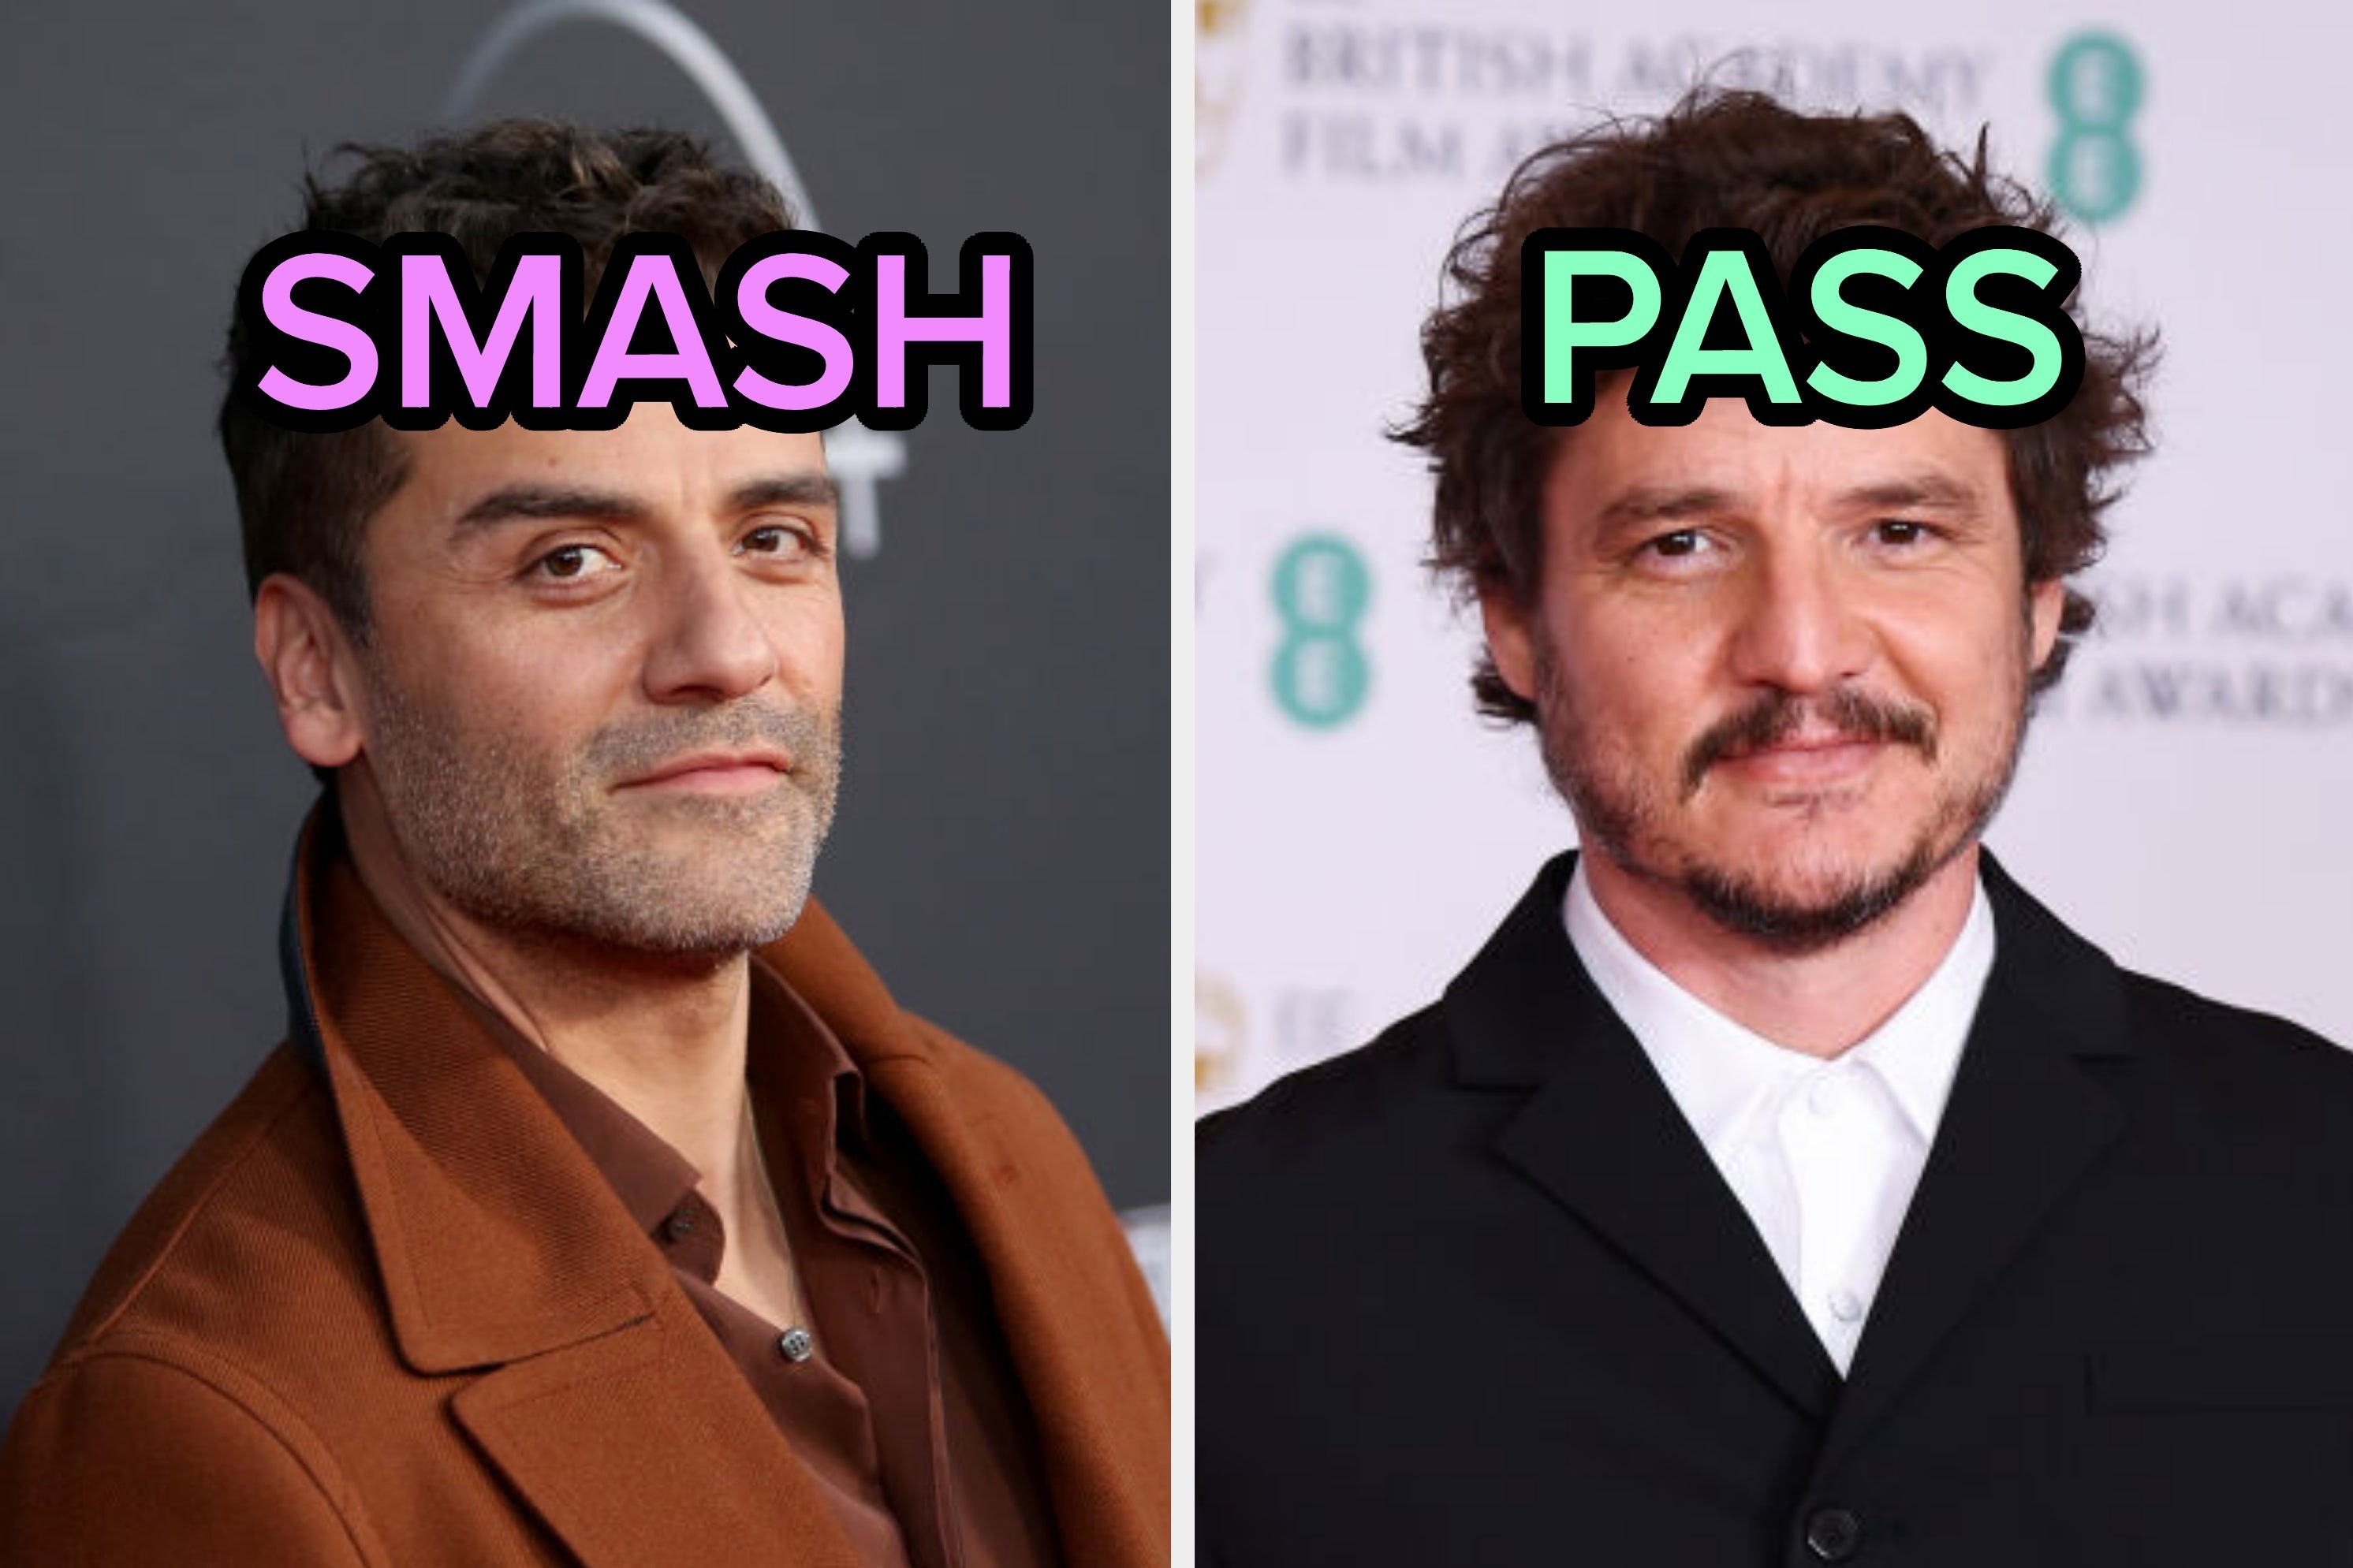 On the left, Oscar Isaac with smash typed on his forehead, and on the right, Pedro Pascal with pass typed on his forehead